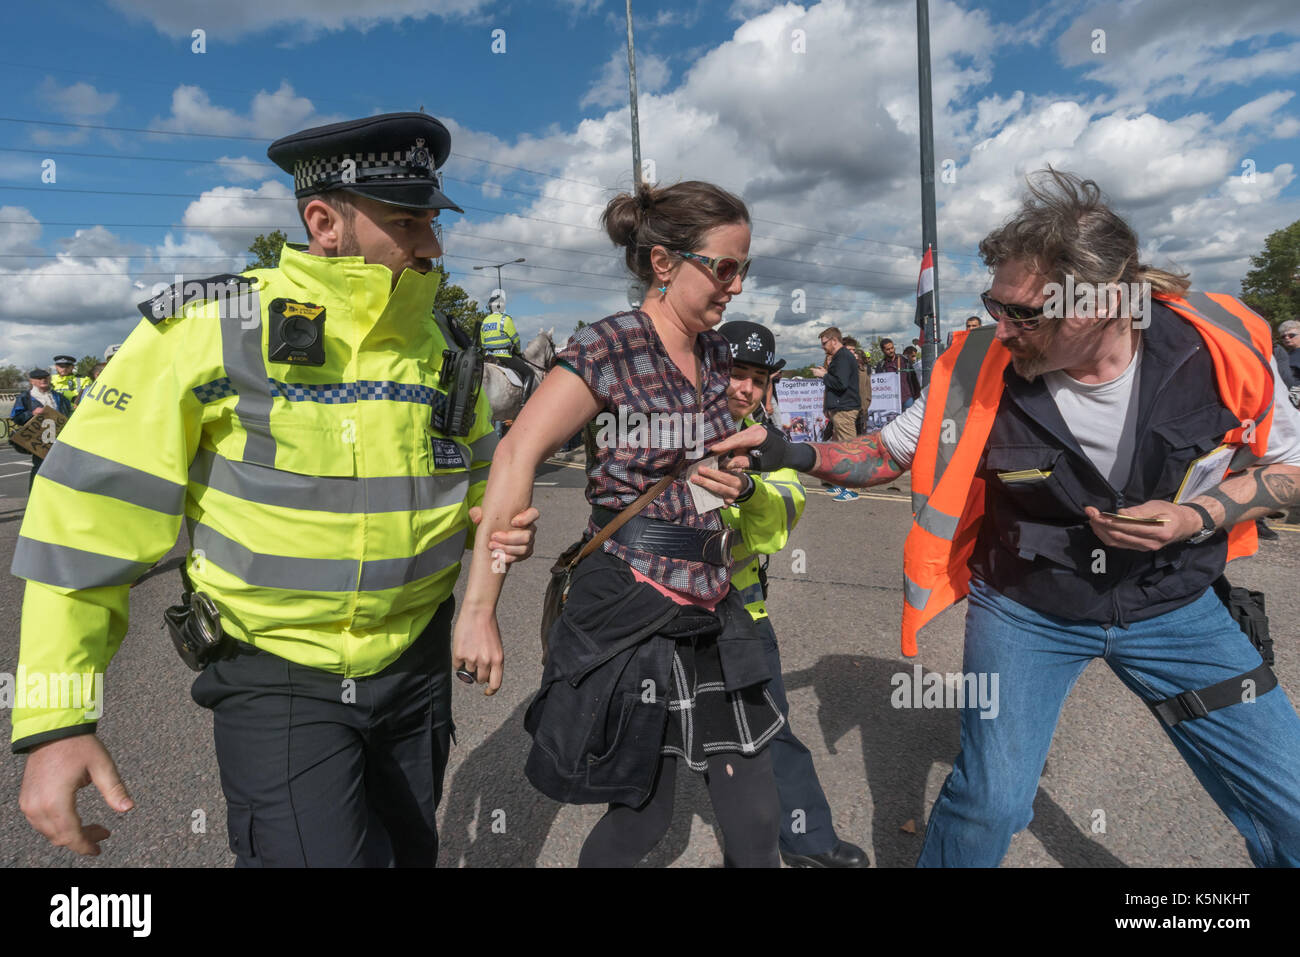 London, UK. 9th Sep, 2017. London, UK. 9th September 2017 Police lead away a woman arrested for sitting on the road at the Festival of Resistance against DSEI Arms Fair to block lorries entering with arms. The Defence & Security Equipment International, backed by the UK government, is where arms companies and arms dealers sell weapons to countries around the world including many repressive regimes. The road at the East Gate was blocked by a lock-on by two protestersand others including this group sat on the road in front of it, with a large group holding a Quaker meeting. Police tried to Stock Photo